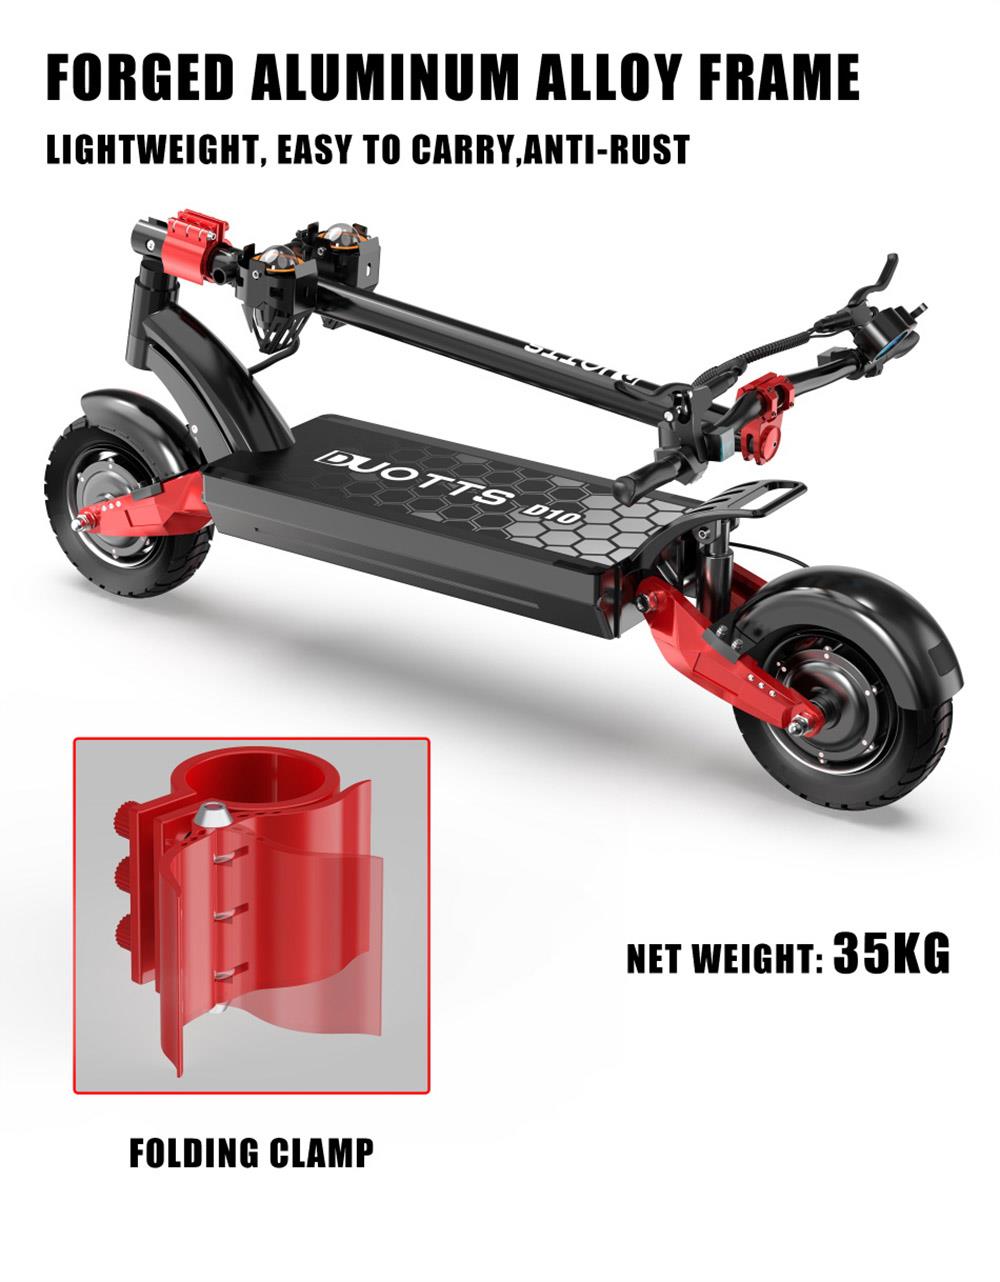 DUOTTS D10 Electric Scooter 1600W*2 Dual Motor 60V 20.8Ah Battery 65km/h Max Speed 150kg Load